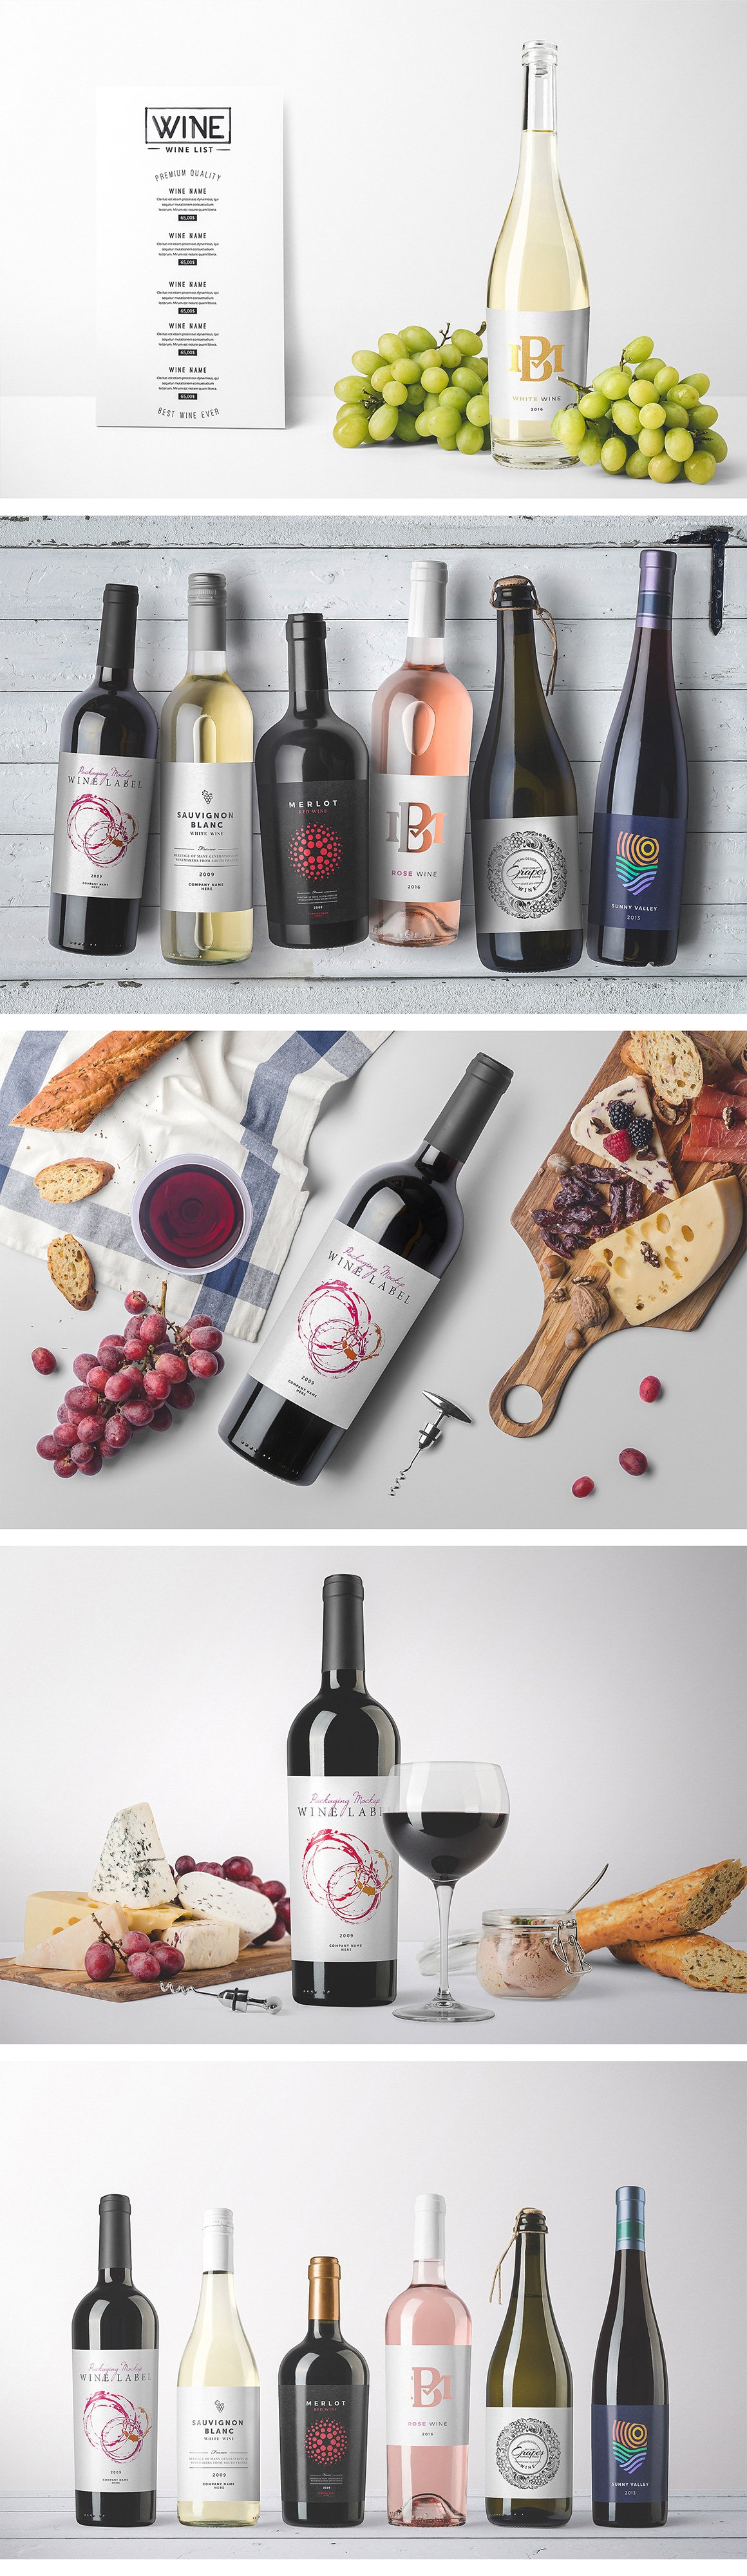 Packaging Mockup Collection